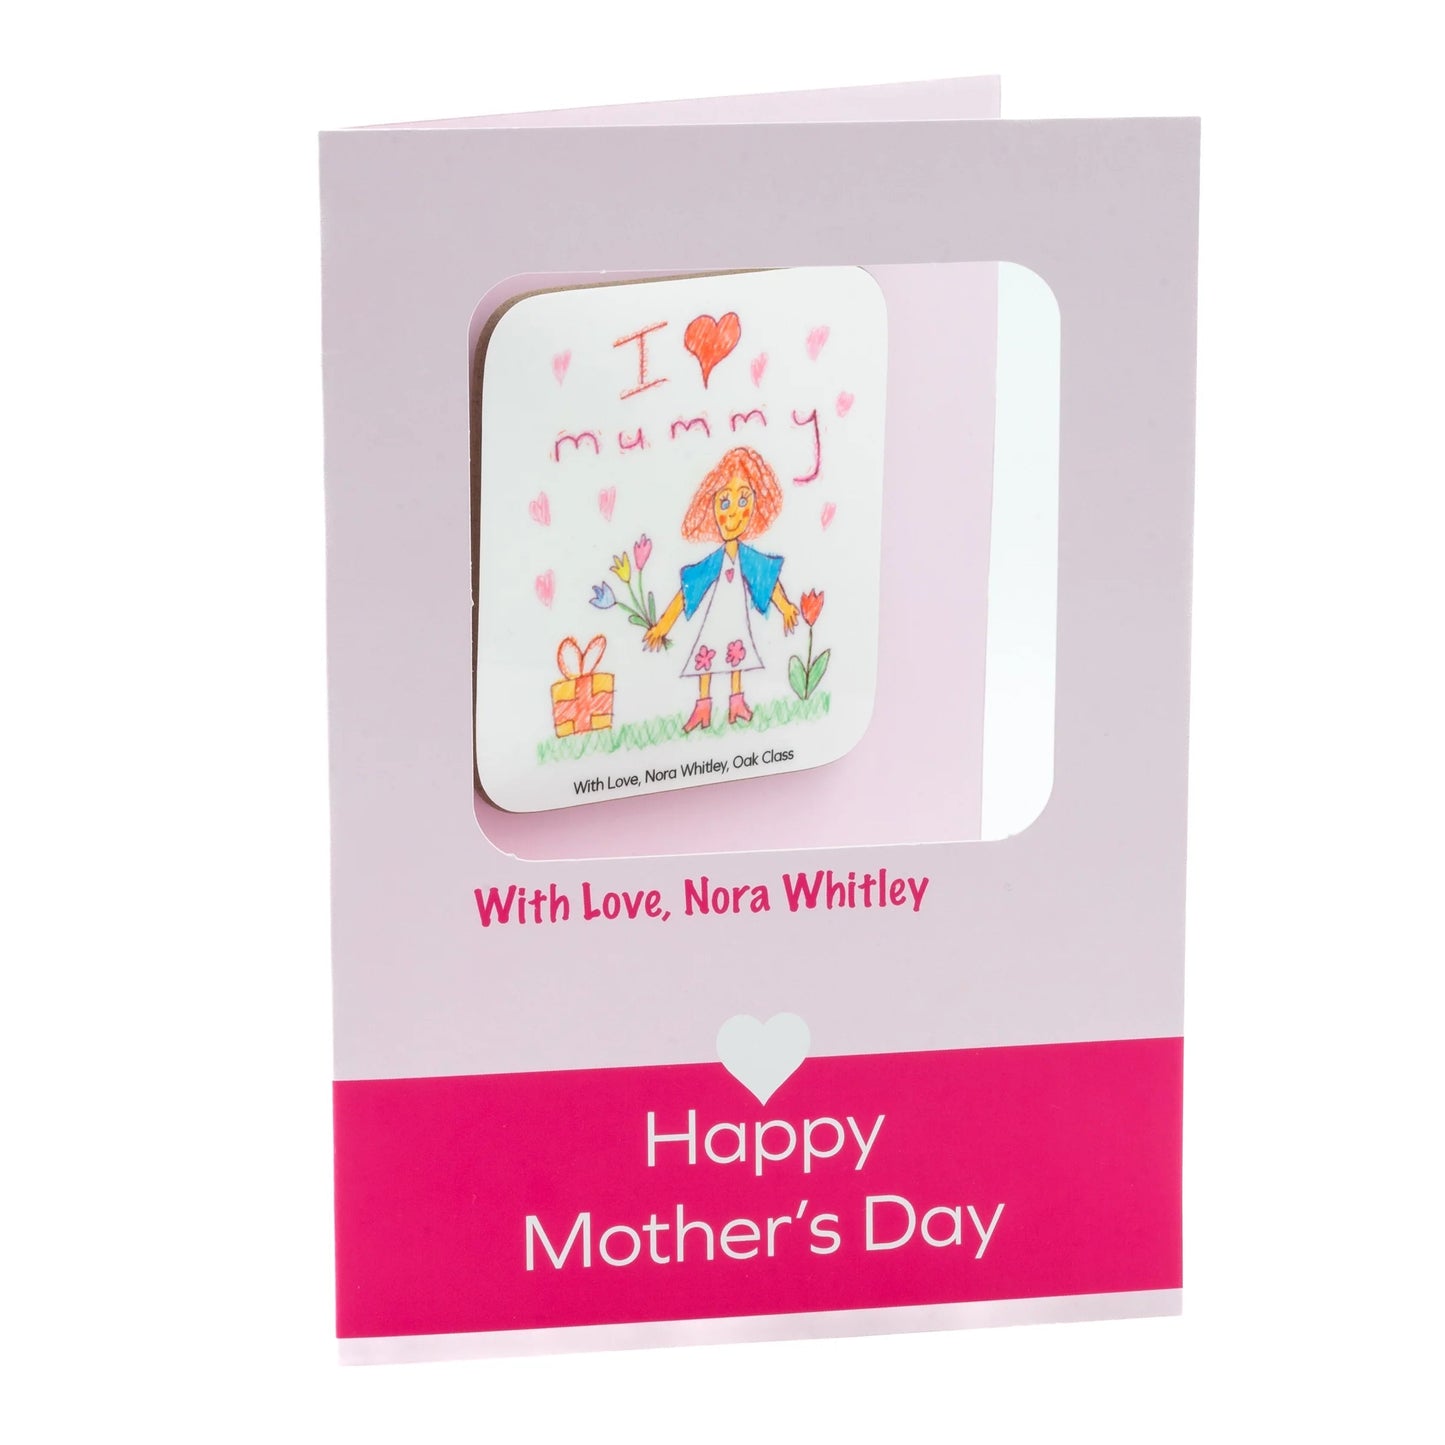 Mother's Day Coaster Card with Detachable Coaster - Class Fundraising UK